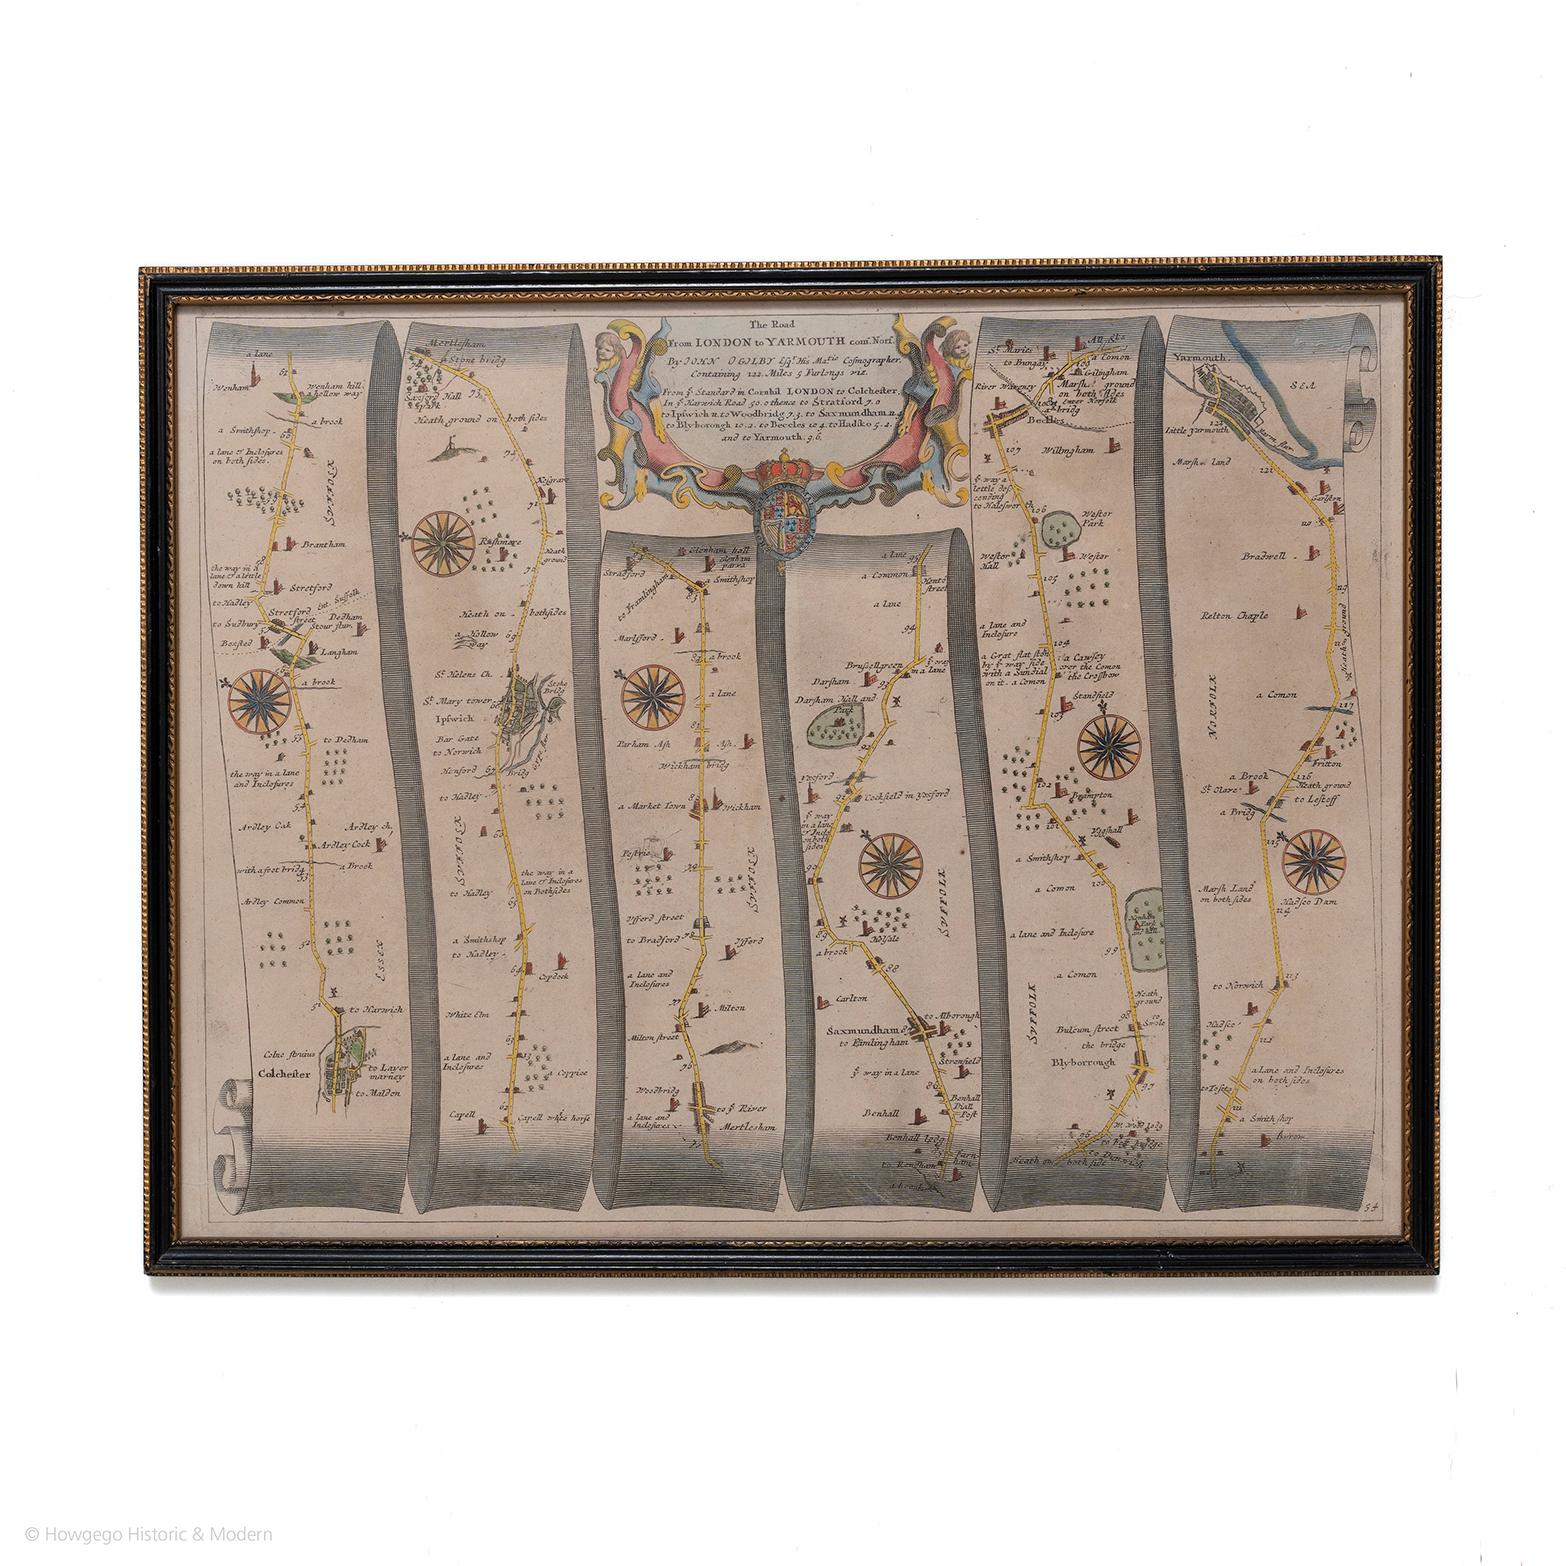 The Road from London to Yarmouth com. Norfolk. By John Ogilby, His Majesties Cosmographer. Containing 122 miles, 5 furlongs. No 54. 

From Standard in Cornhil London to Colchester. In Harwich Road thence to Stratford, to Ipswich, to Woodbridge, to